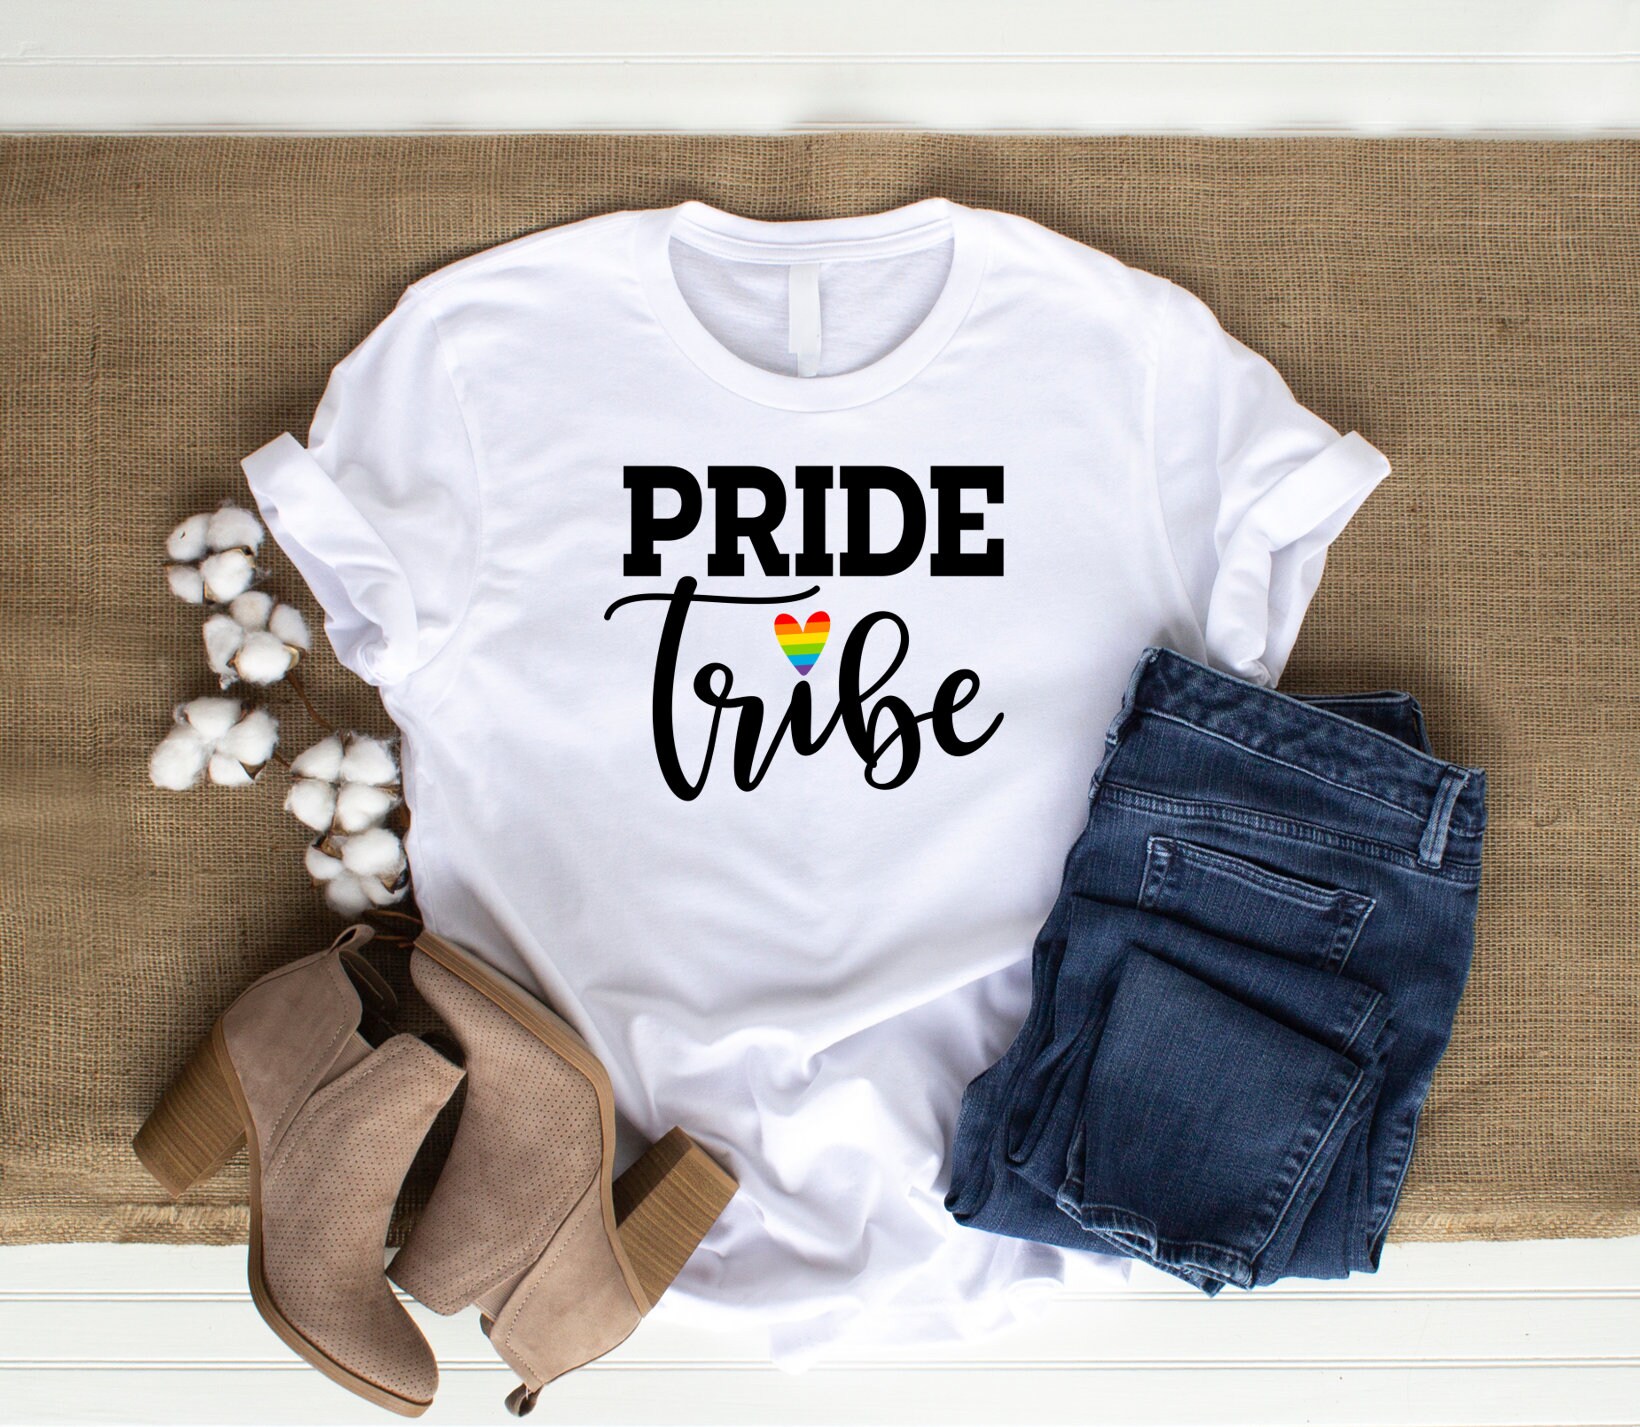 Pride Tribe Unisex Adult T-shirt Matching Pride Apparel - Etsy